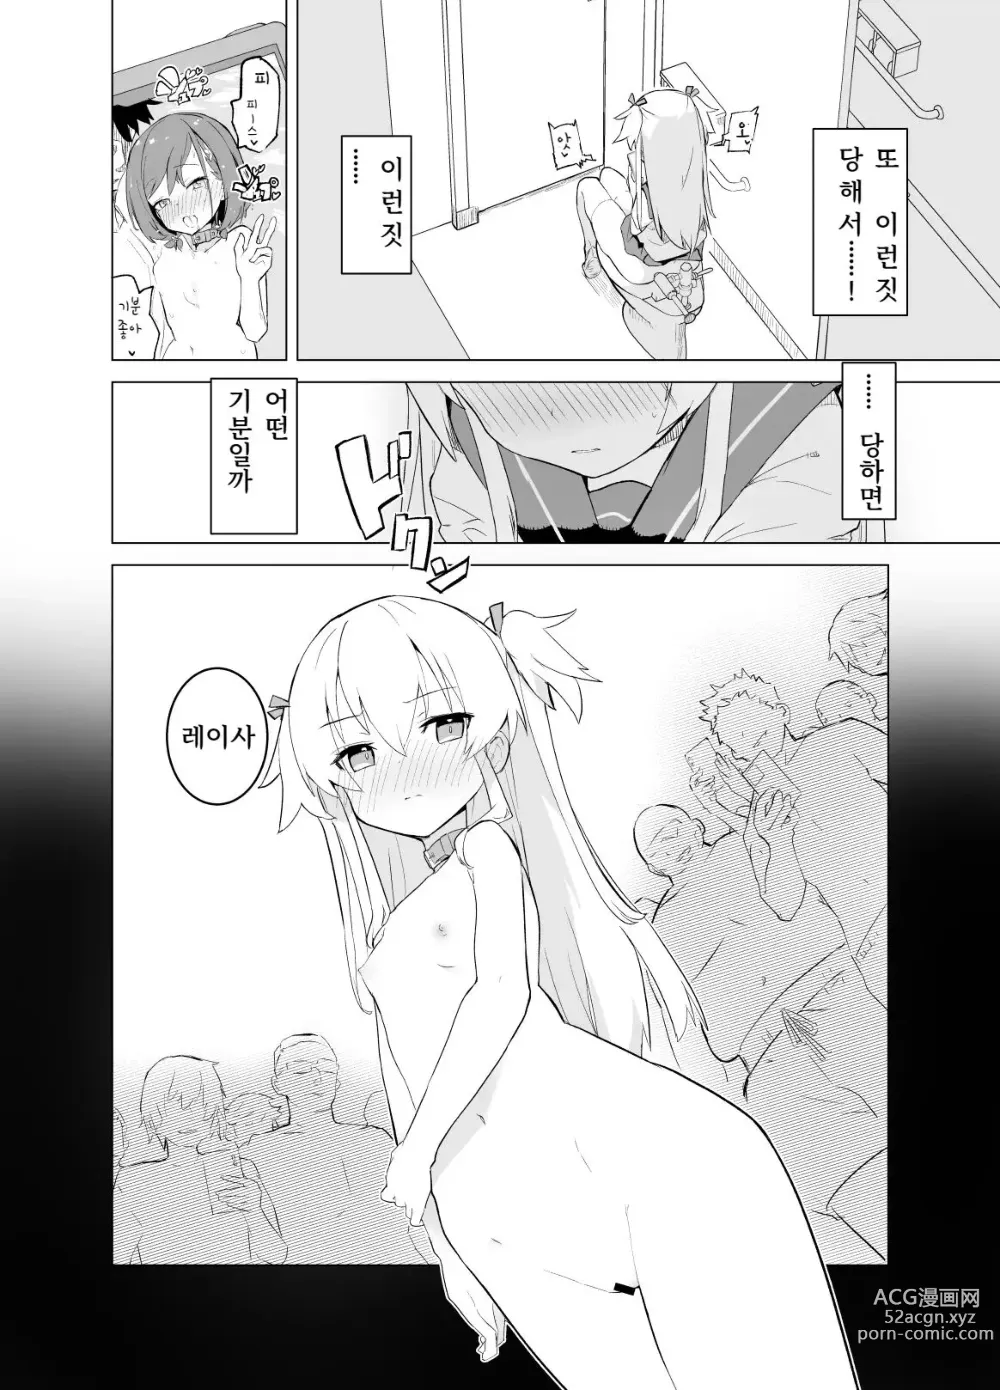 Page 7 of doujinshi S.S.S.Di part 1